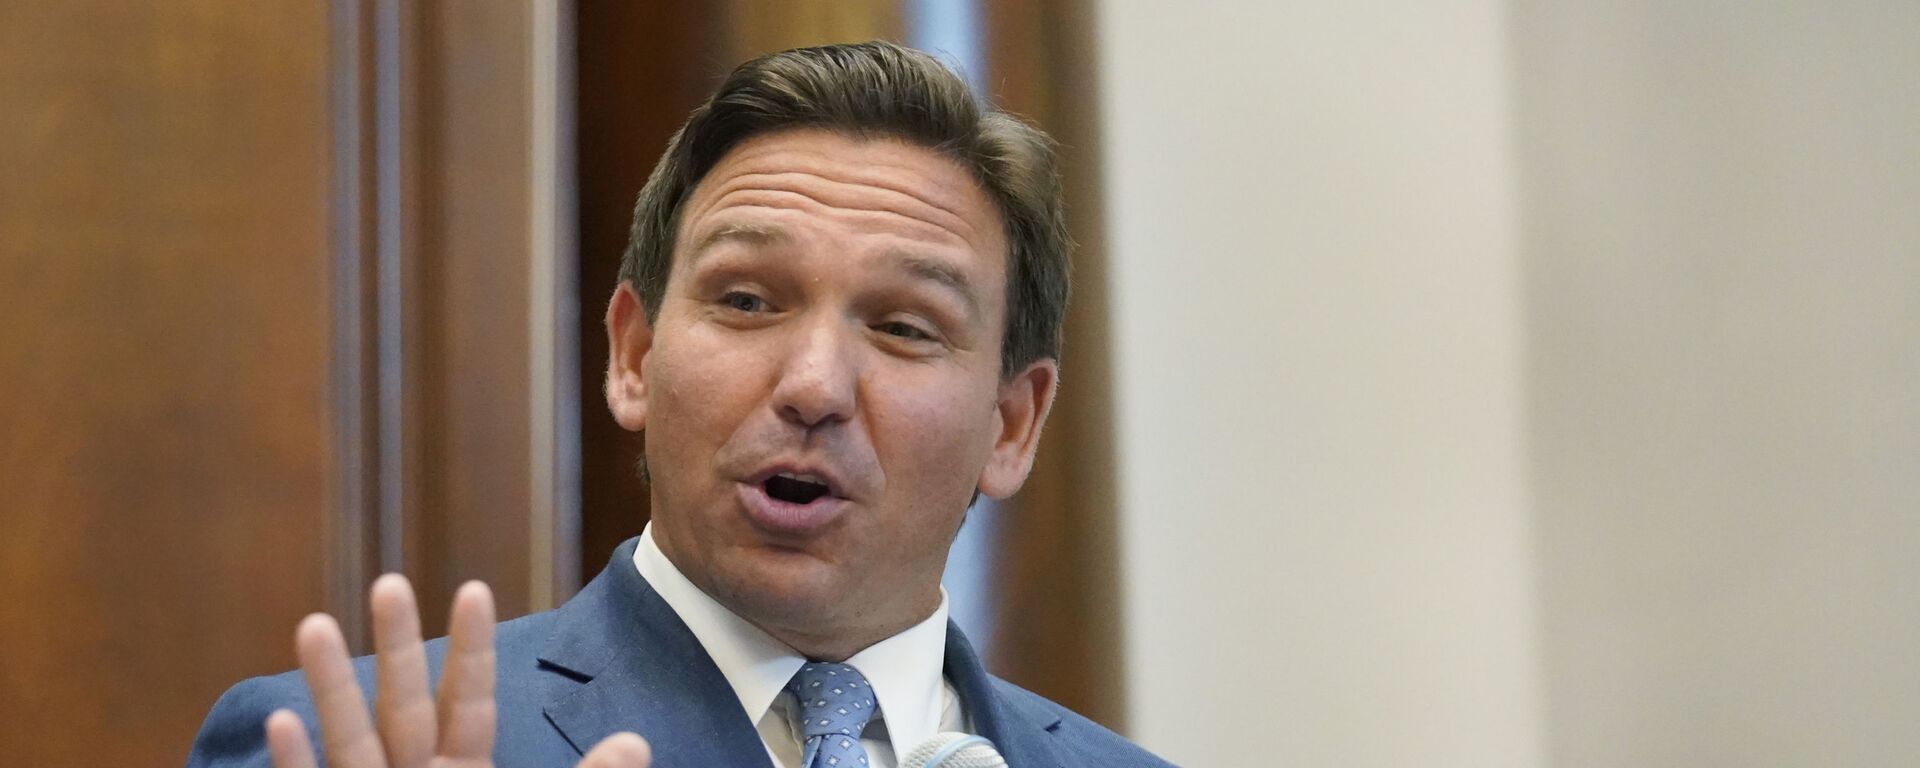 Florida Gov. Ron DeSantis gestures as he speaks, Monday, June 14, 2021, at the Shul of Bal Harbour, a Jewish community center in Surfside, Fla. DeSantis visited the South Florida temple to denounce anti-Semitism and stand with Israel, while signing a bill into law that would require public schools in his state to set aside moments of silence for children to meditate or pray - Sputnik International, 1920, 05.08.2021